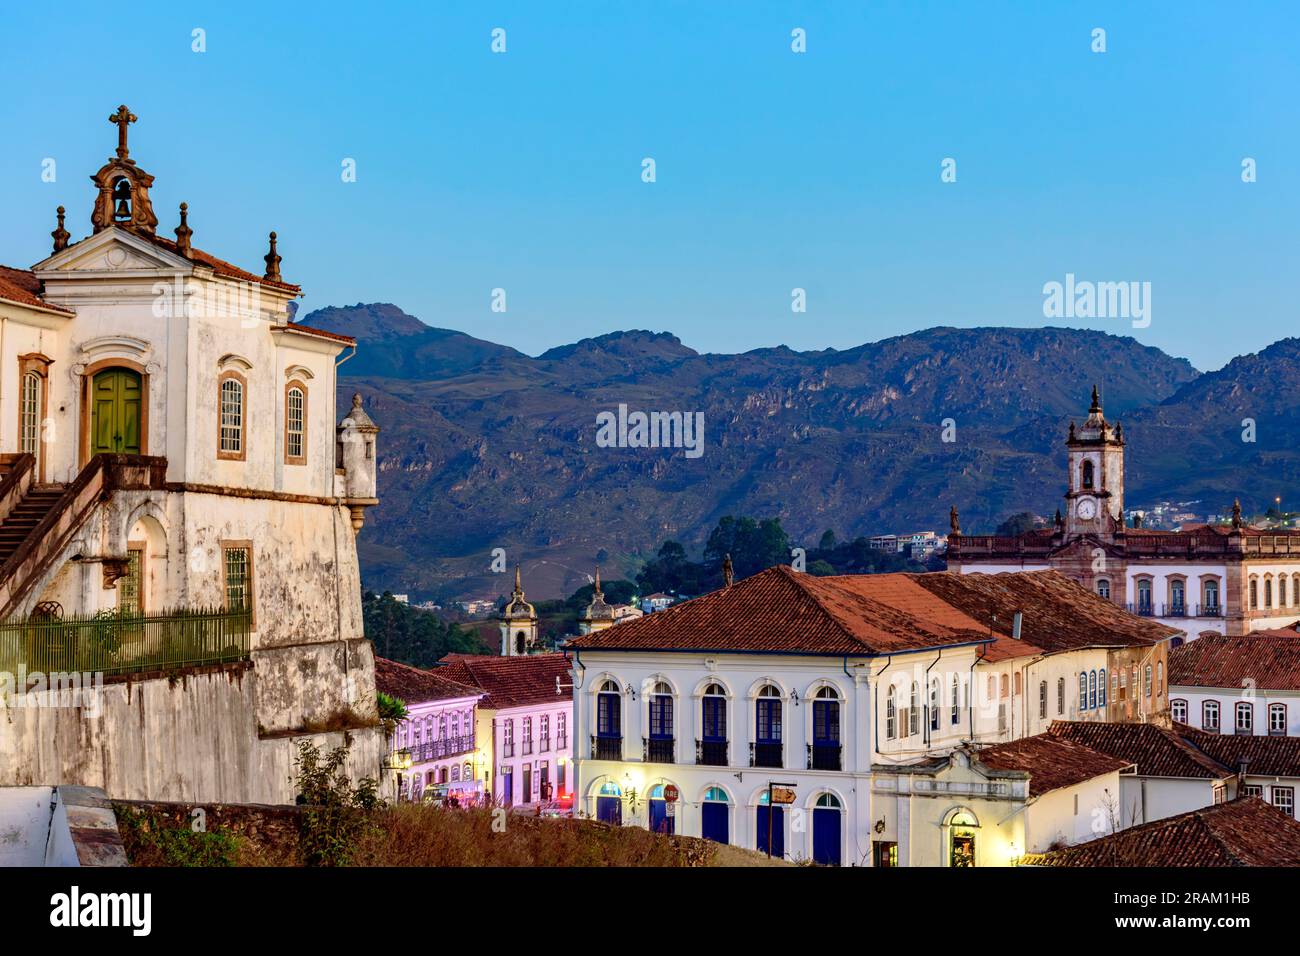 Beautiful historic city of Ouro Preto with its houses, churches, monuments and mountains Stock Photo